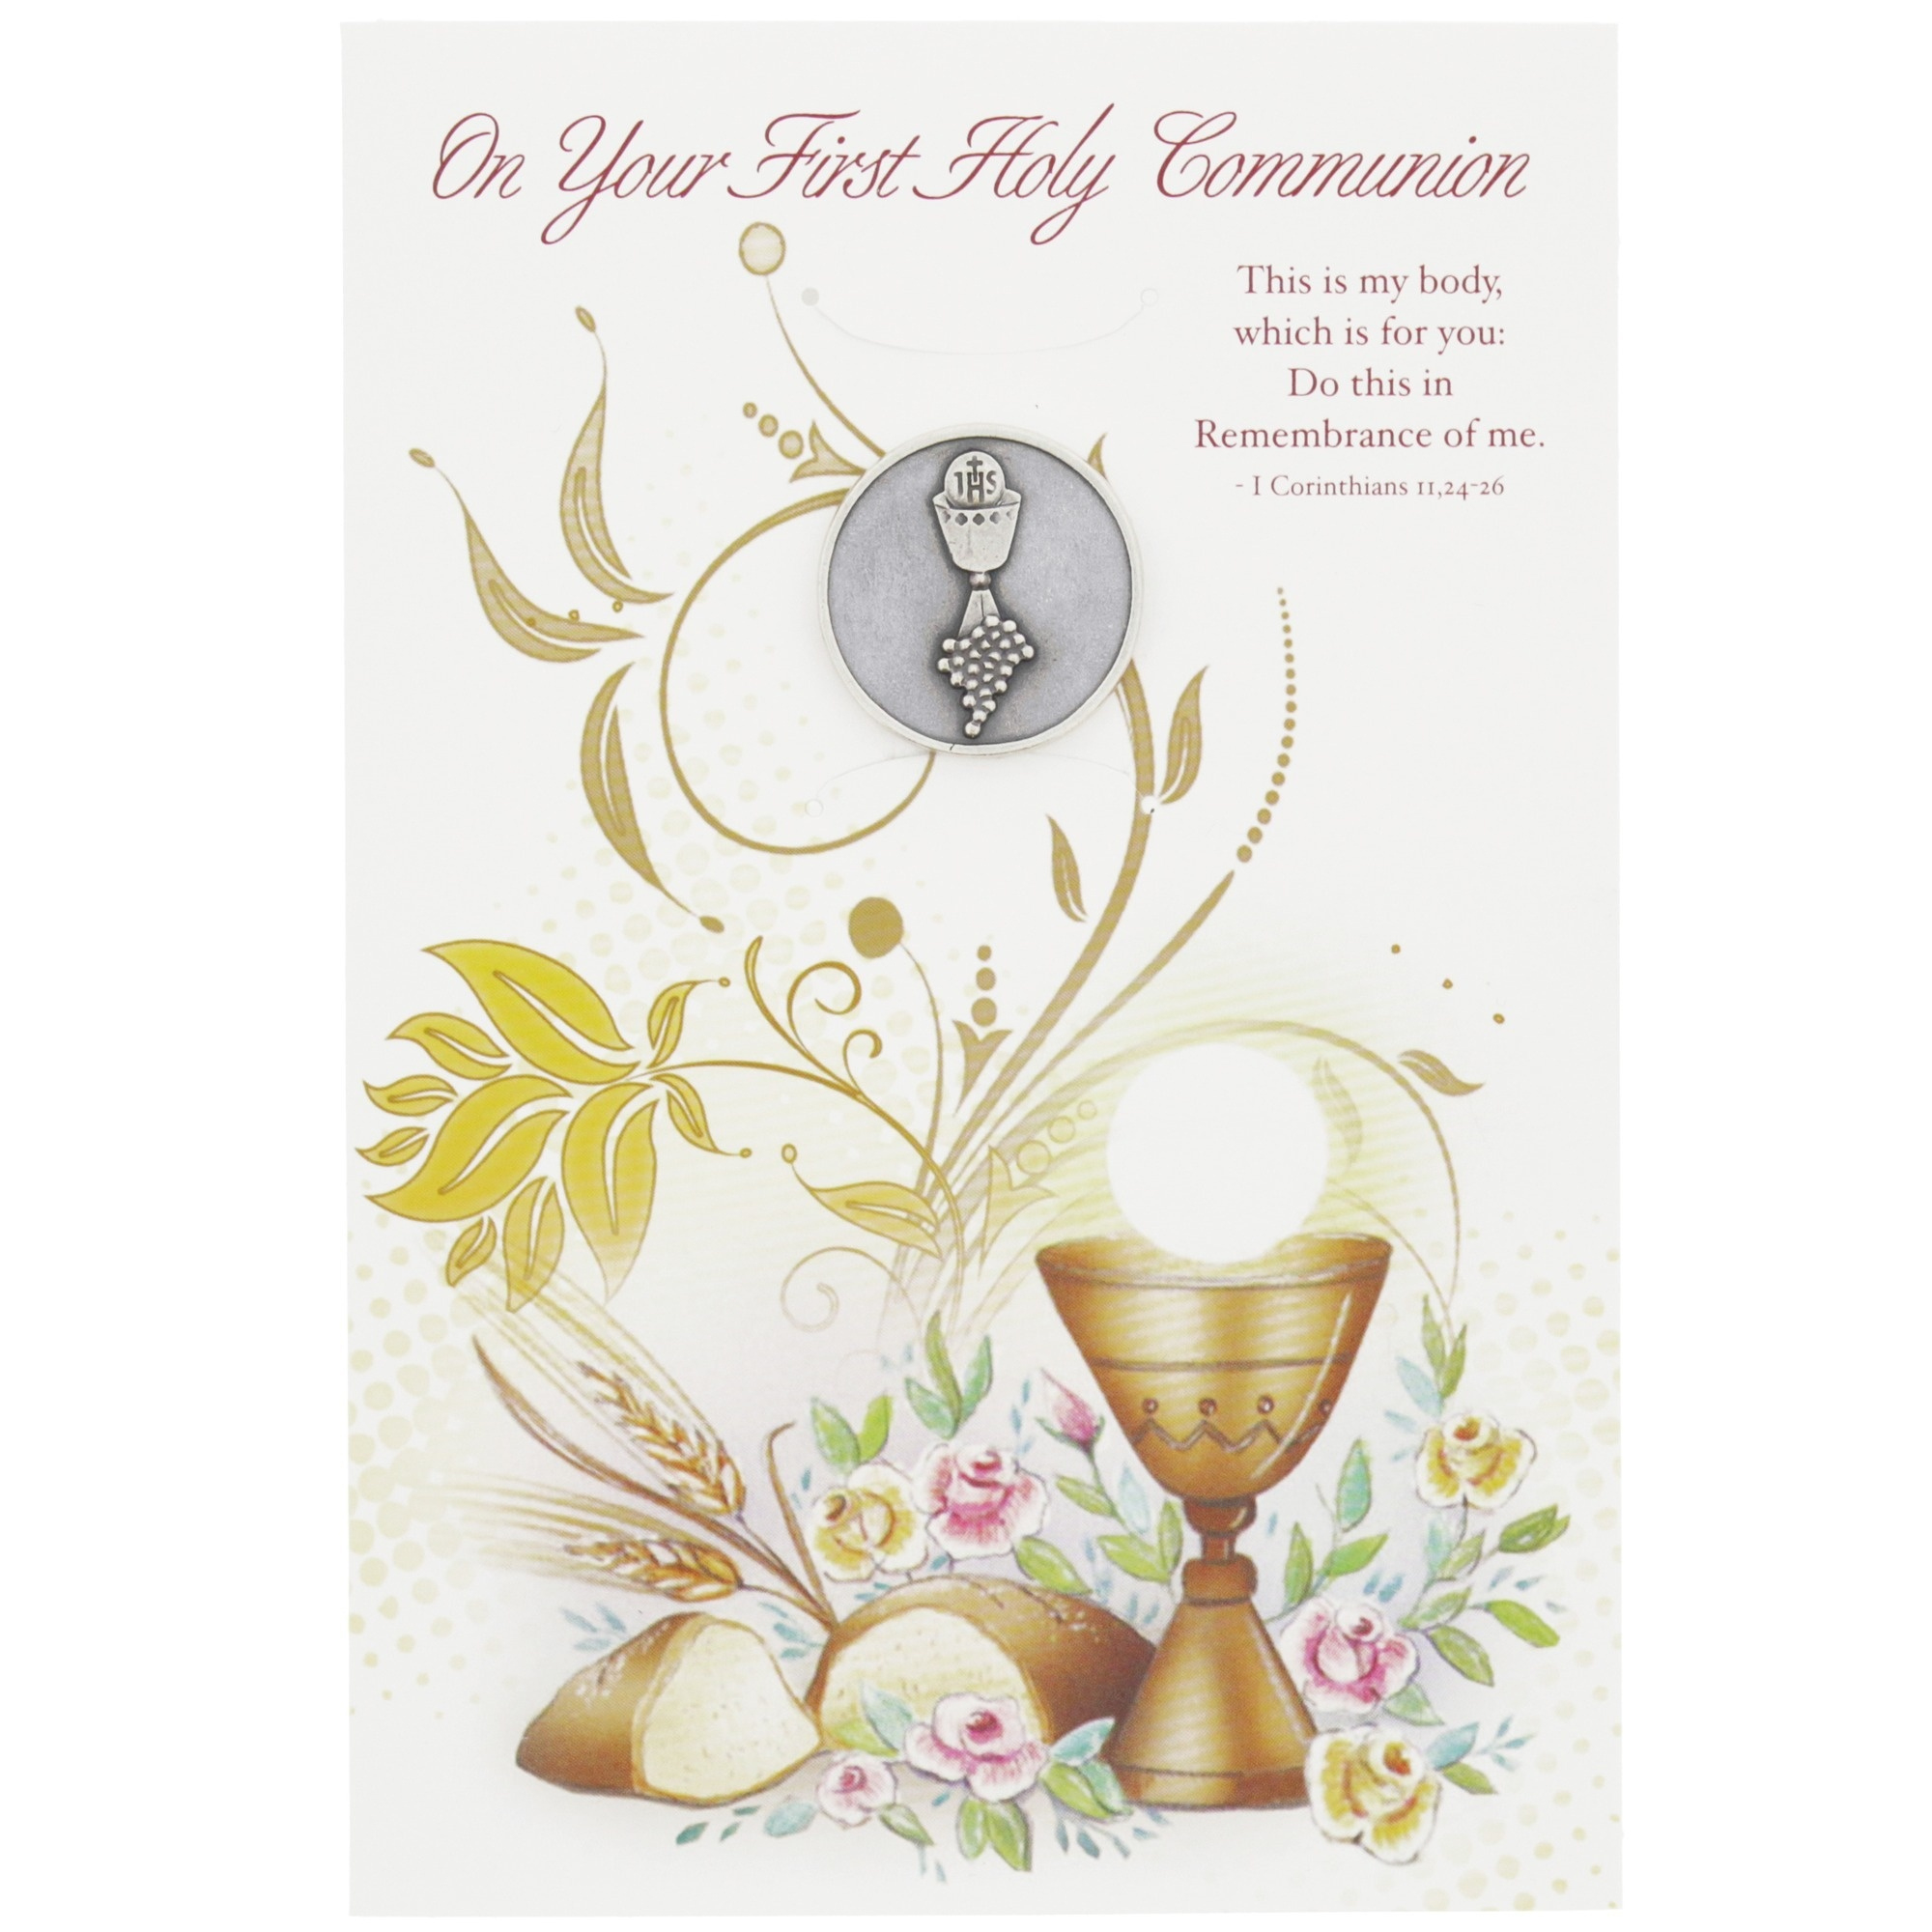 First Holy Communion Cards - Printable First Communion Cards Free for First Holy Communion Cards Printable Free